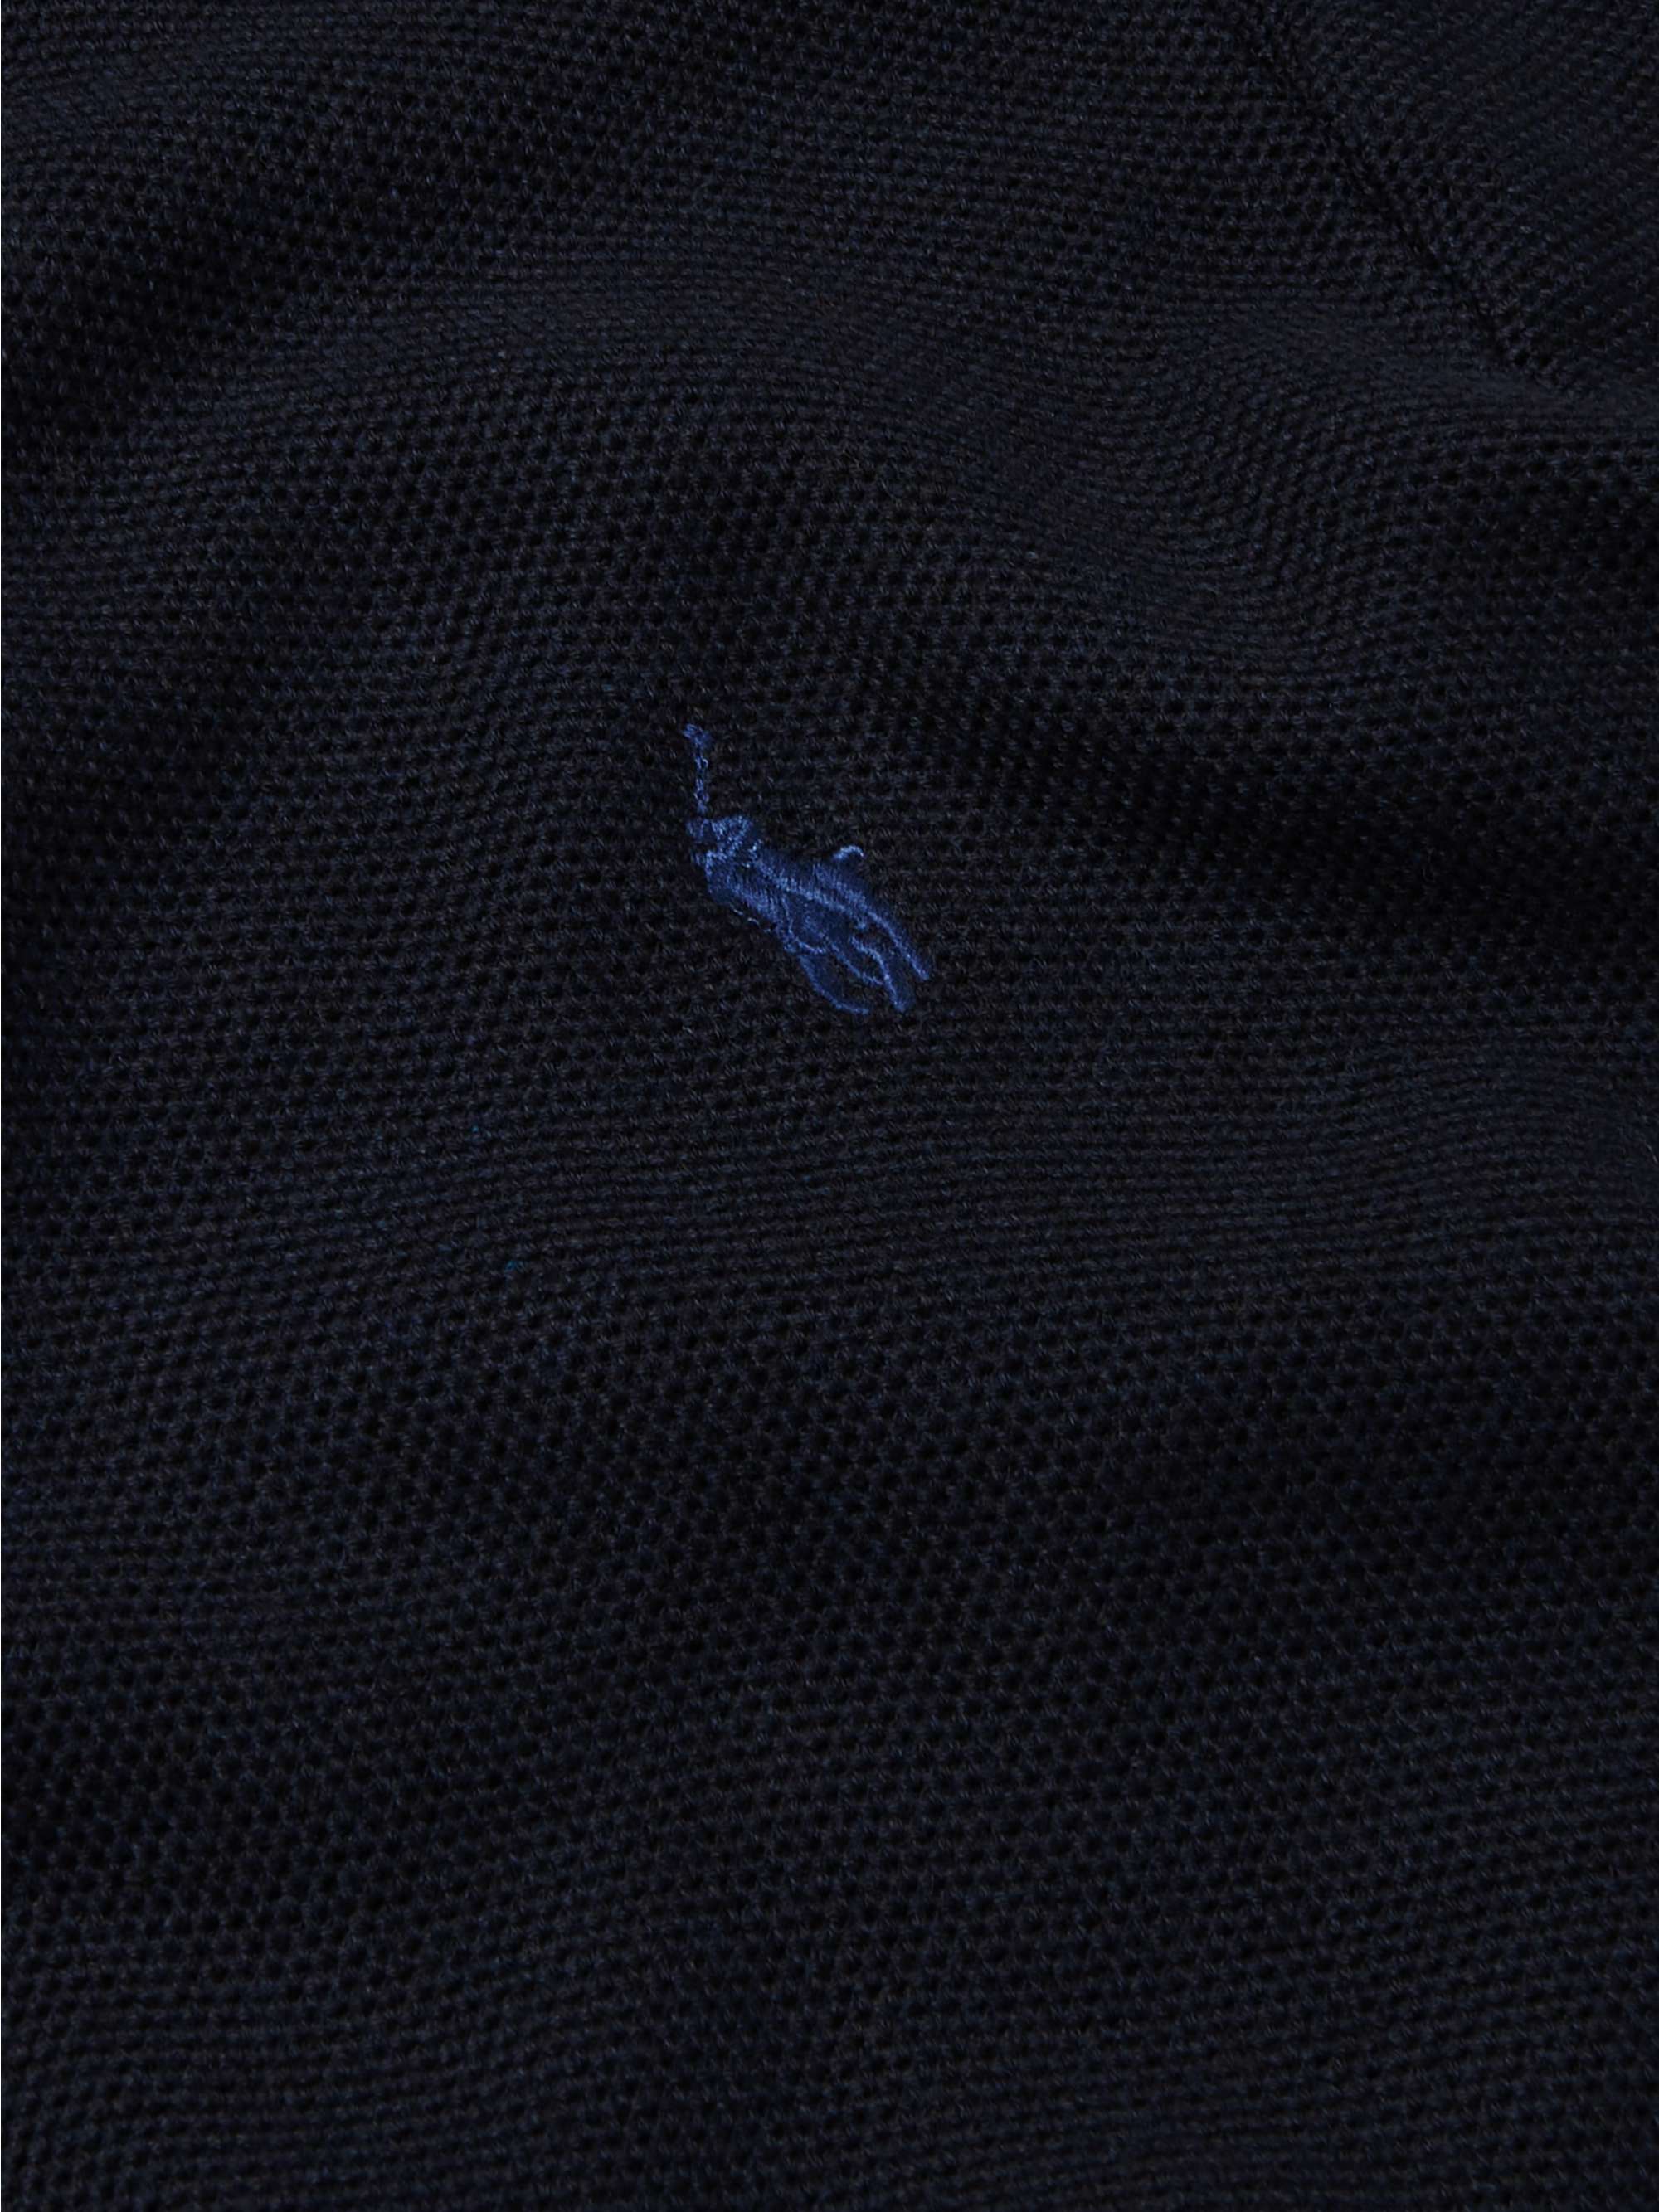 POLO RALPH LAUREN Logo-Embroidered Honeycomb-Knit Cotton Sweater